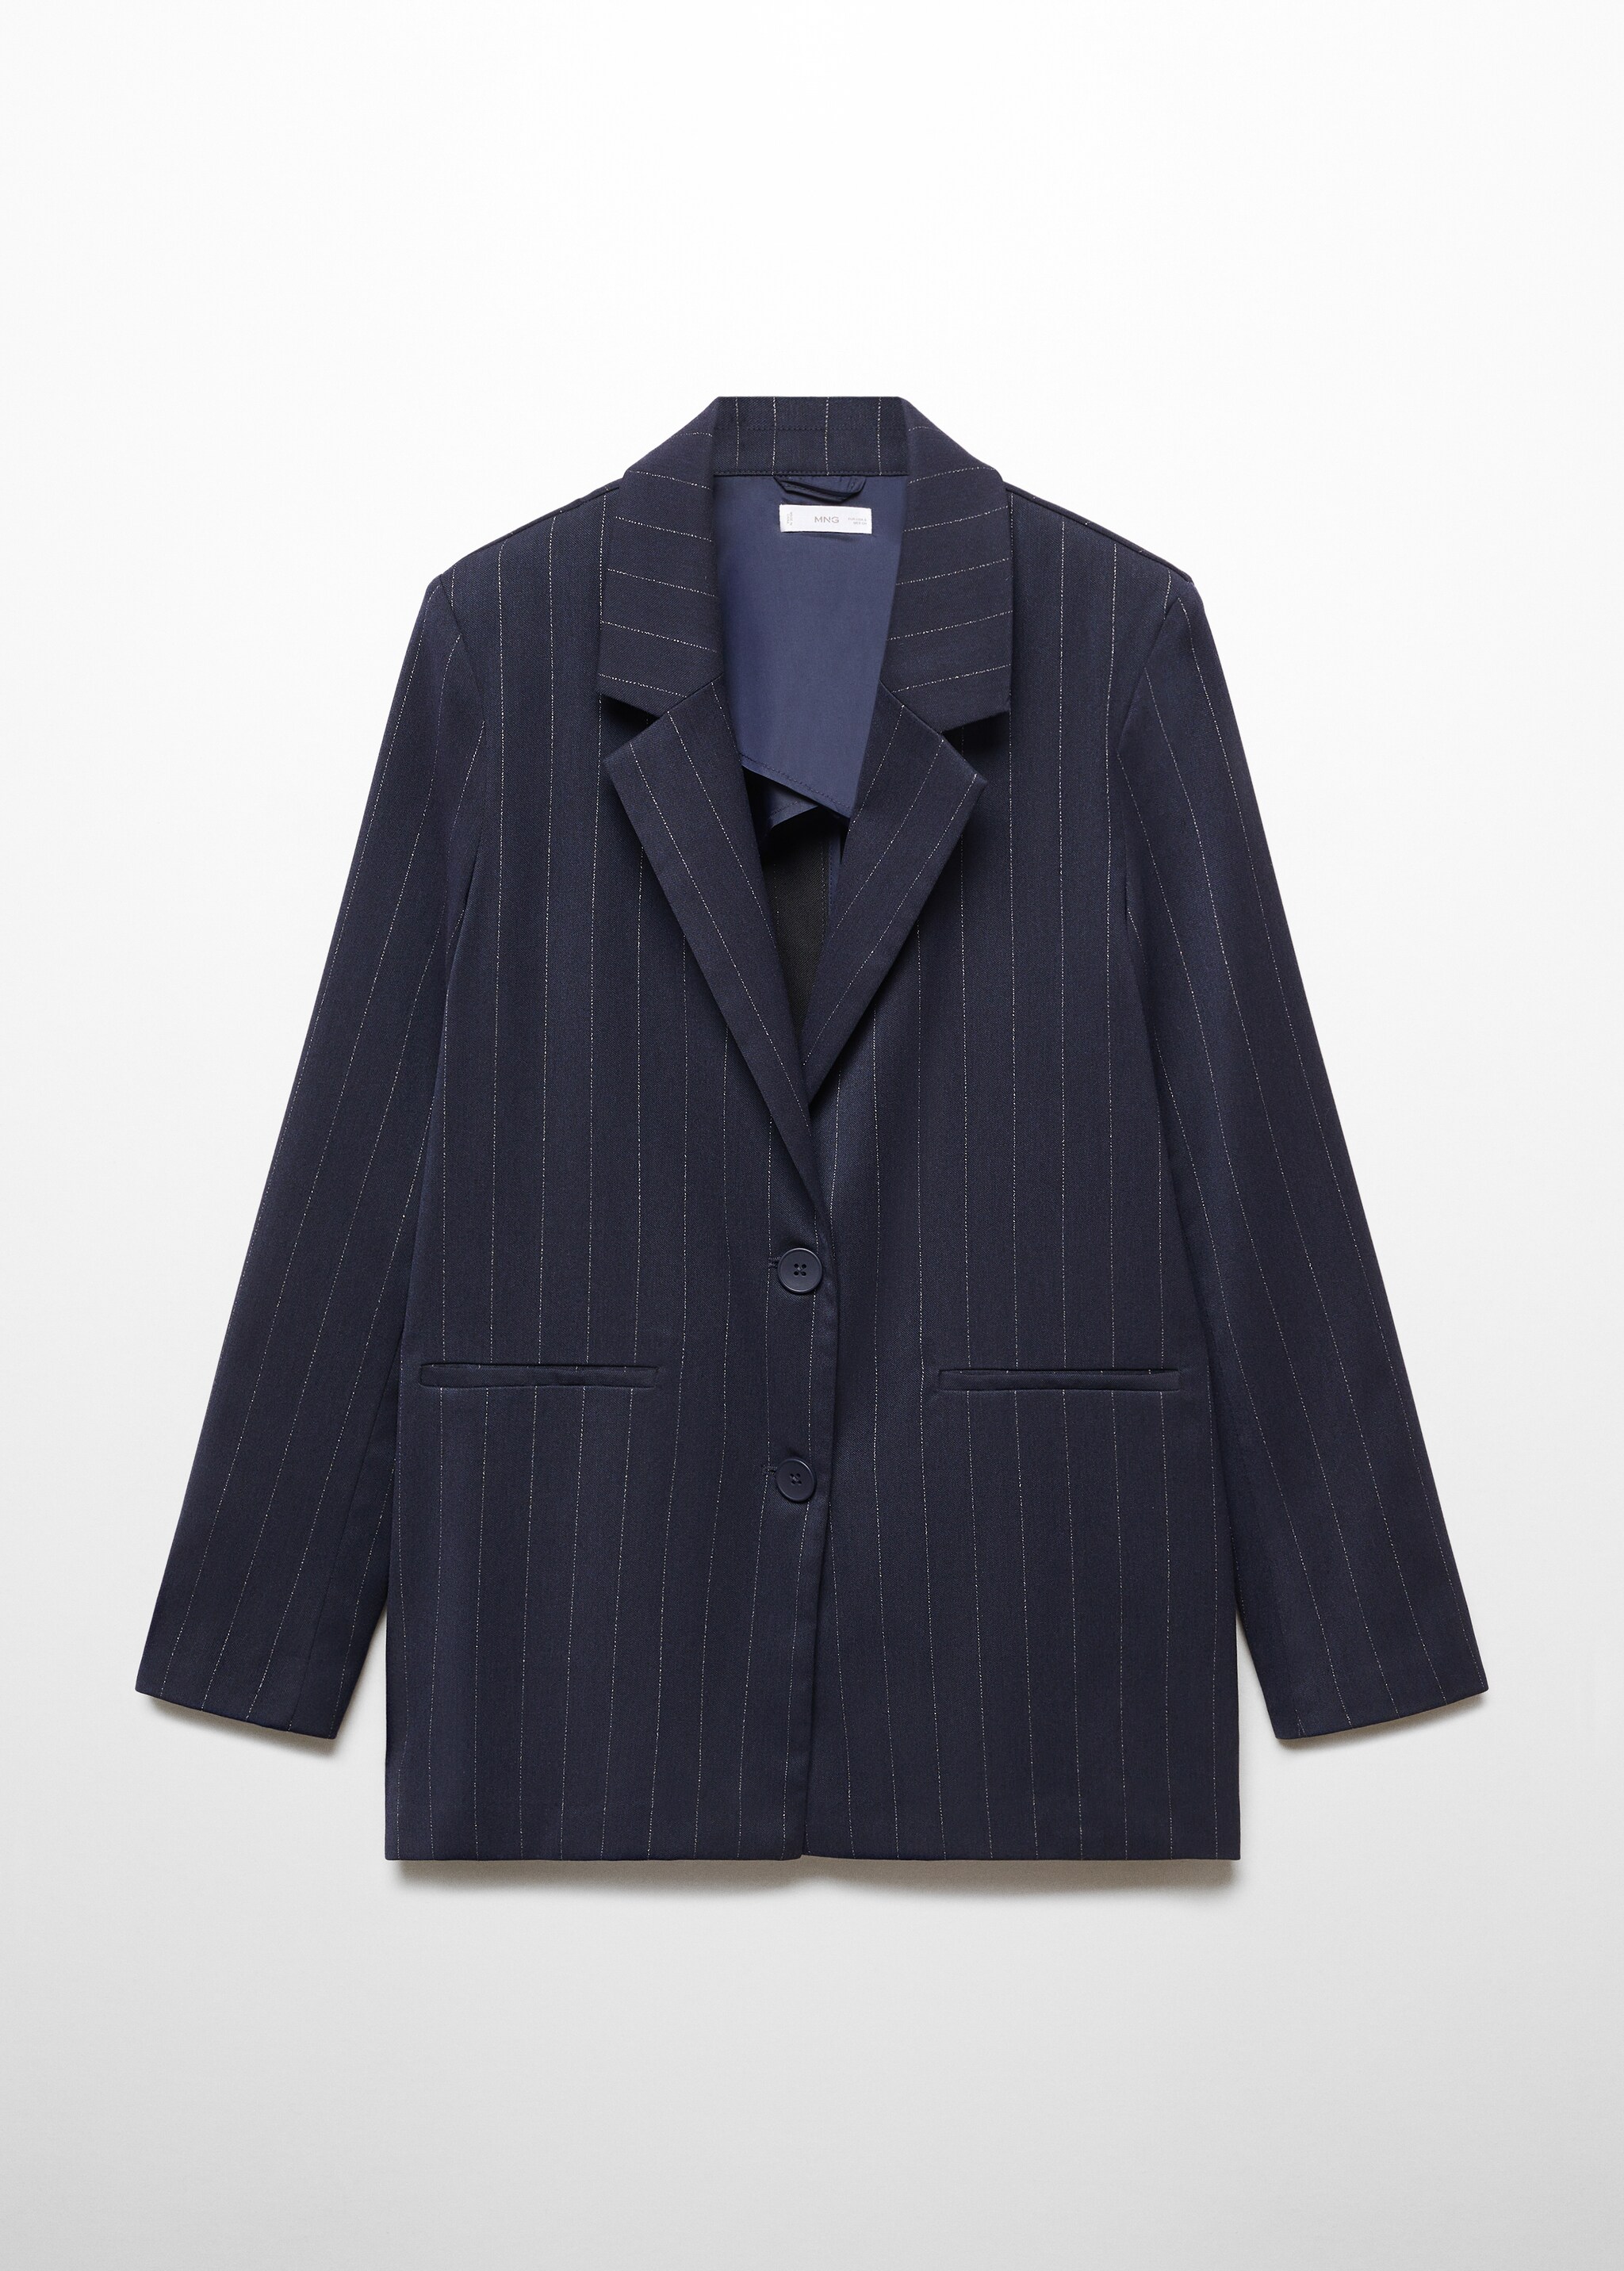 Pinstripe blazer - Article without model